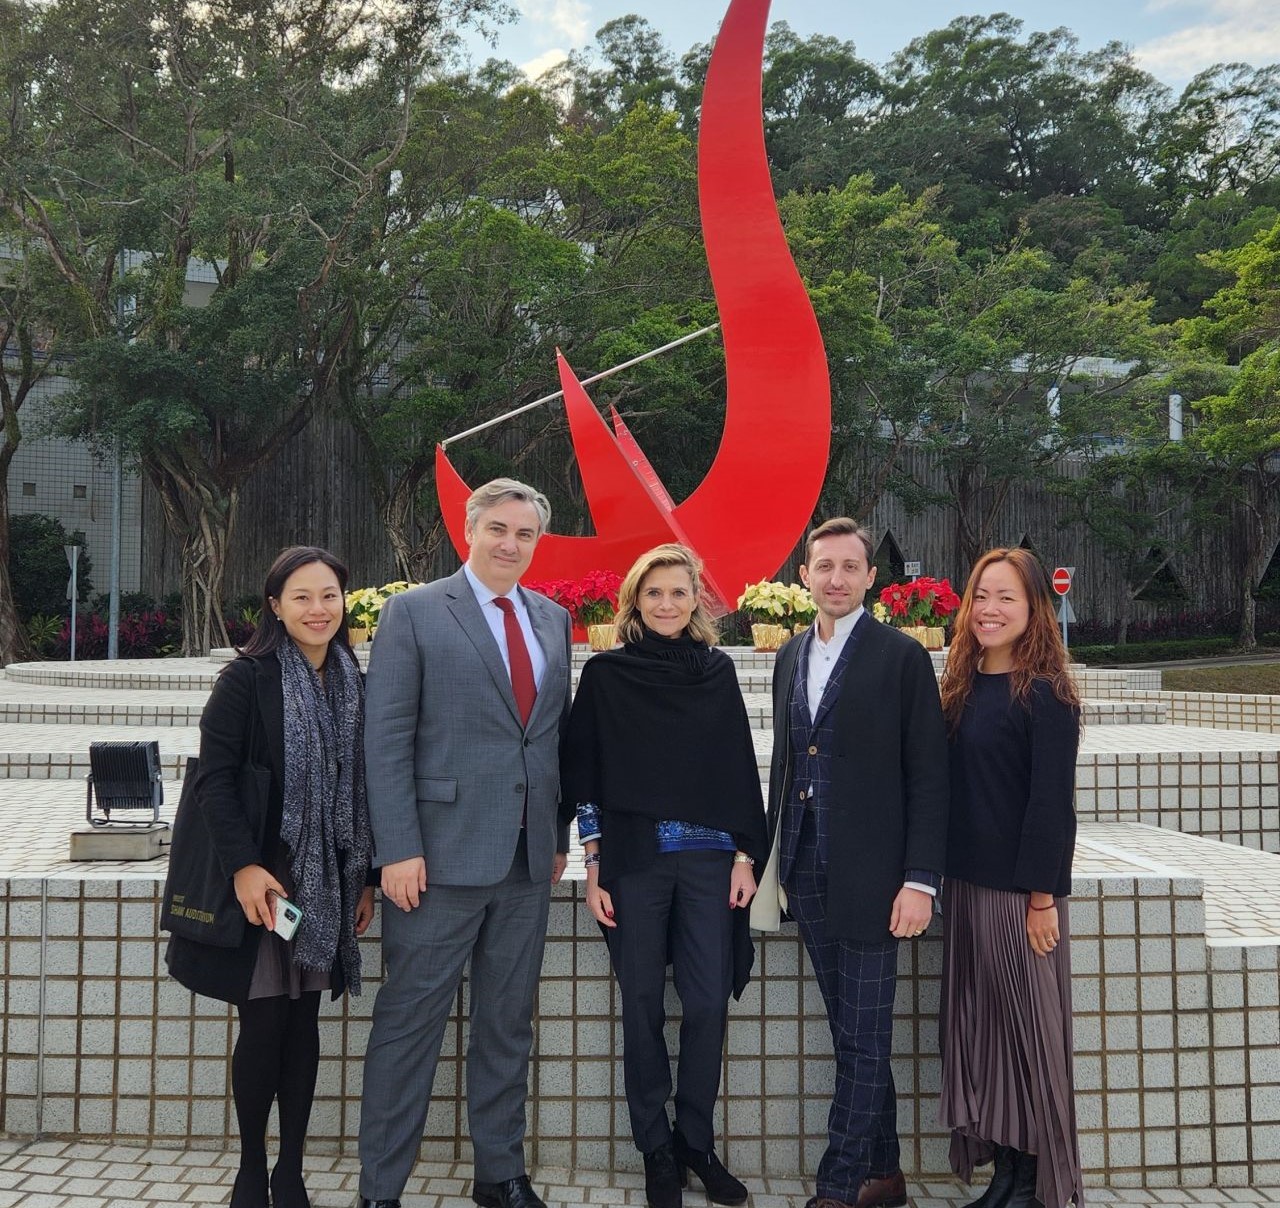 Delegation of Fondation de France delegation took a photo in front of the iconic “Red Bird” sculpture at the Piazza.